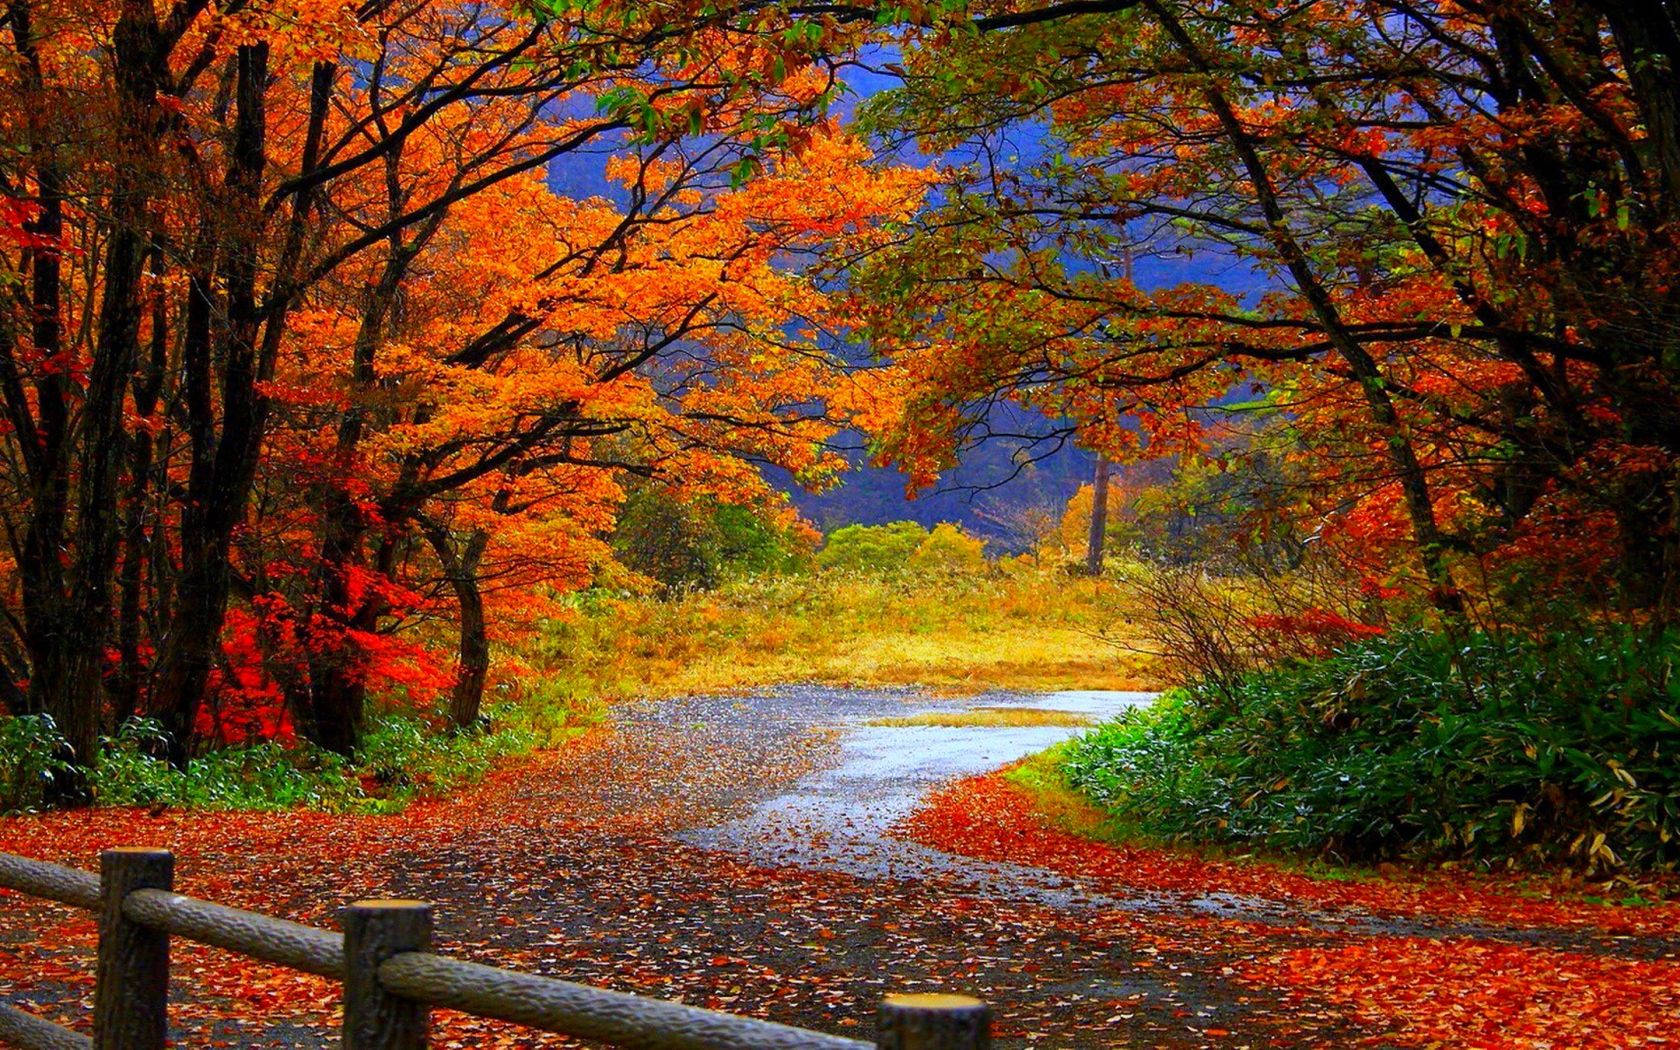 Take A Breathtaking Walk Down The Country Road During Fall